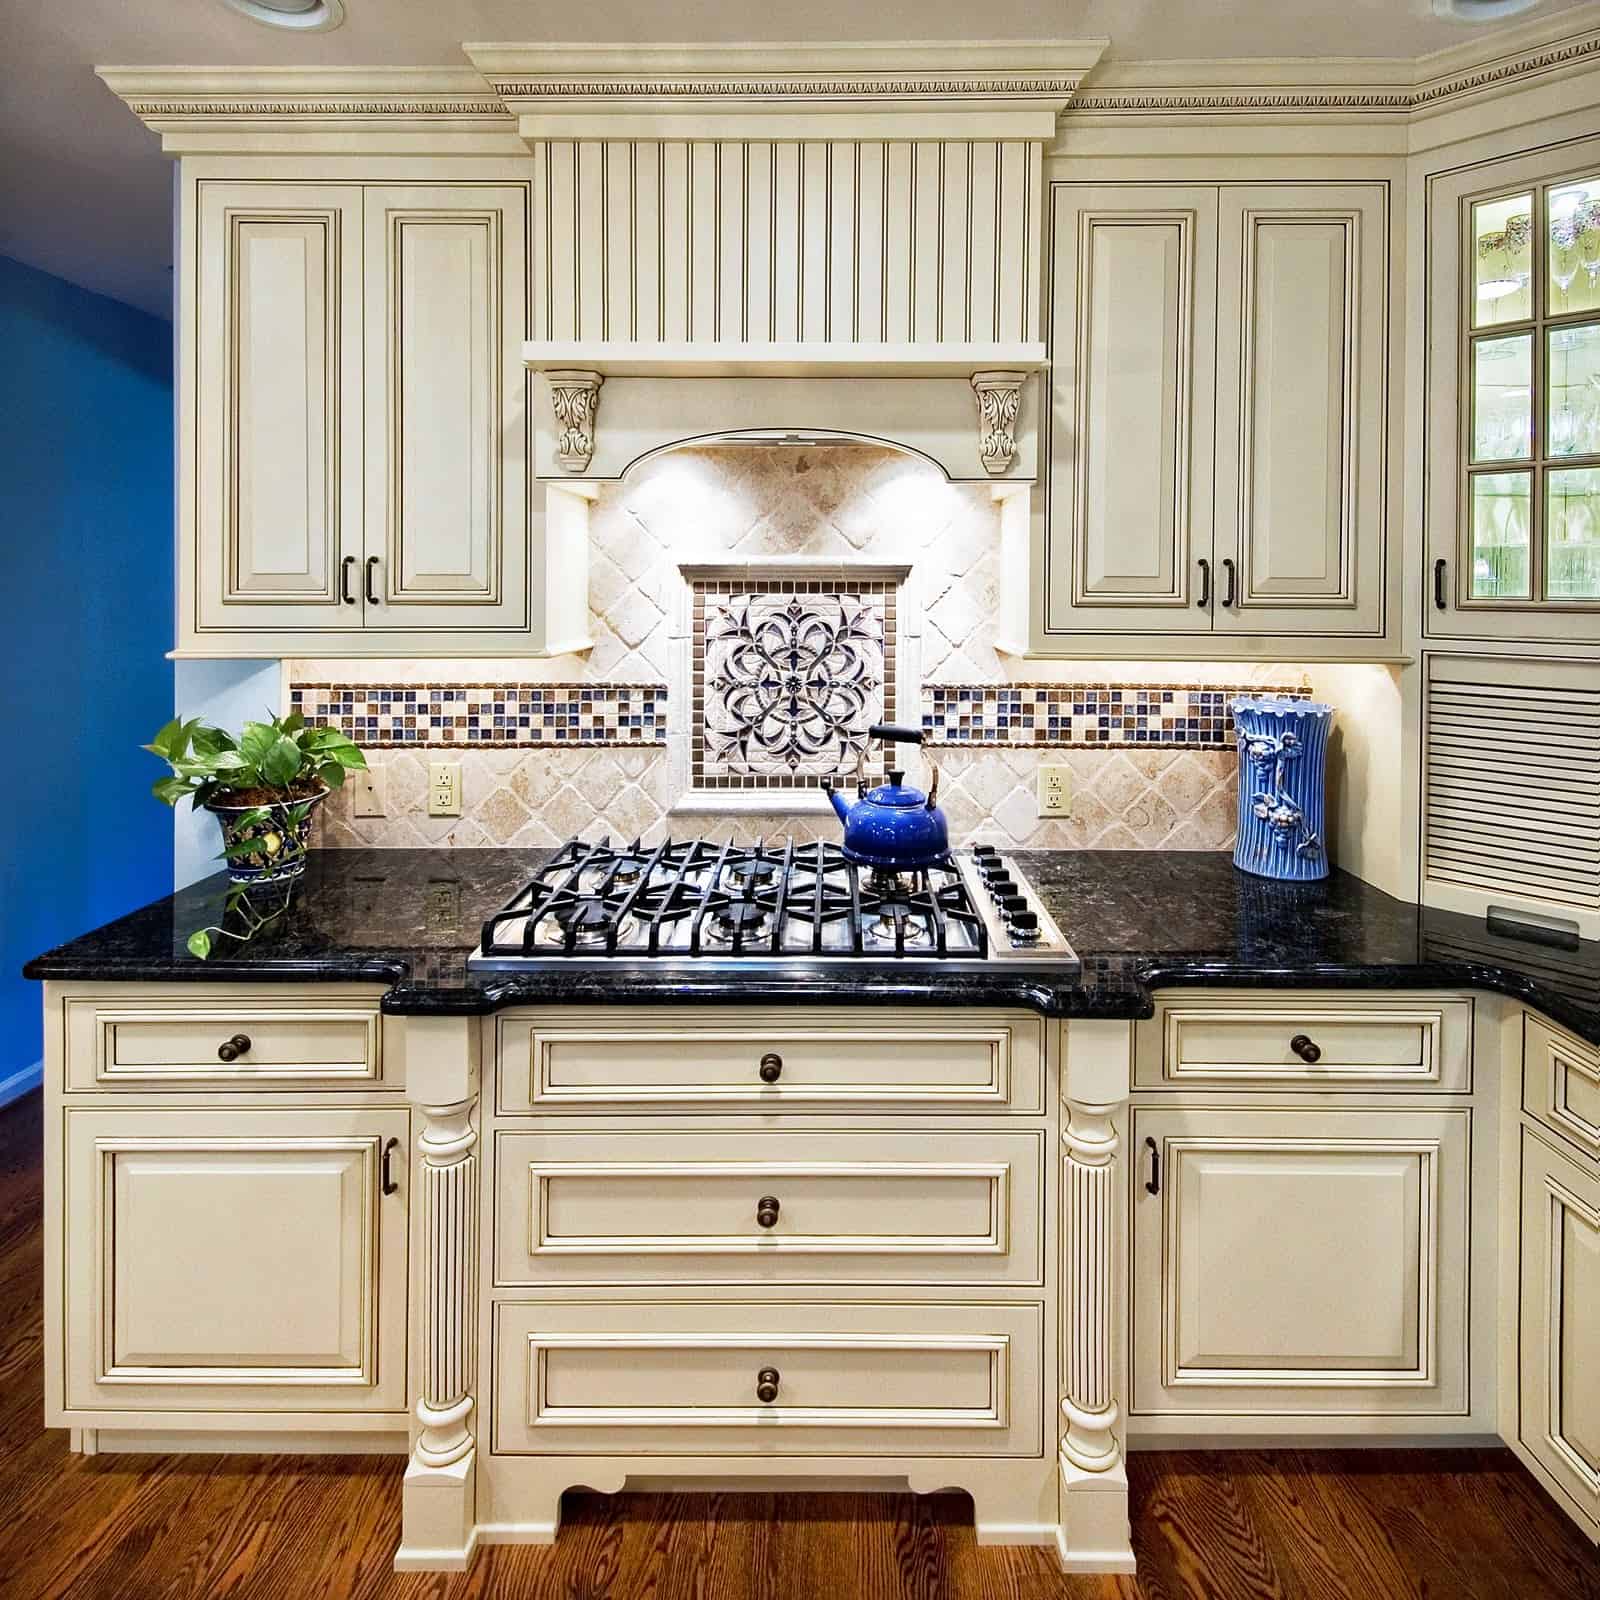 Tips to Update Your Kitchen on a Tight Budget - backsplash